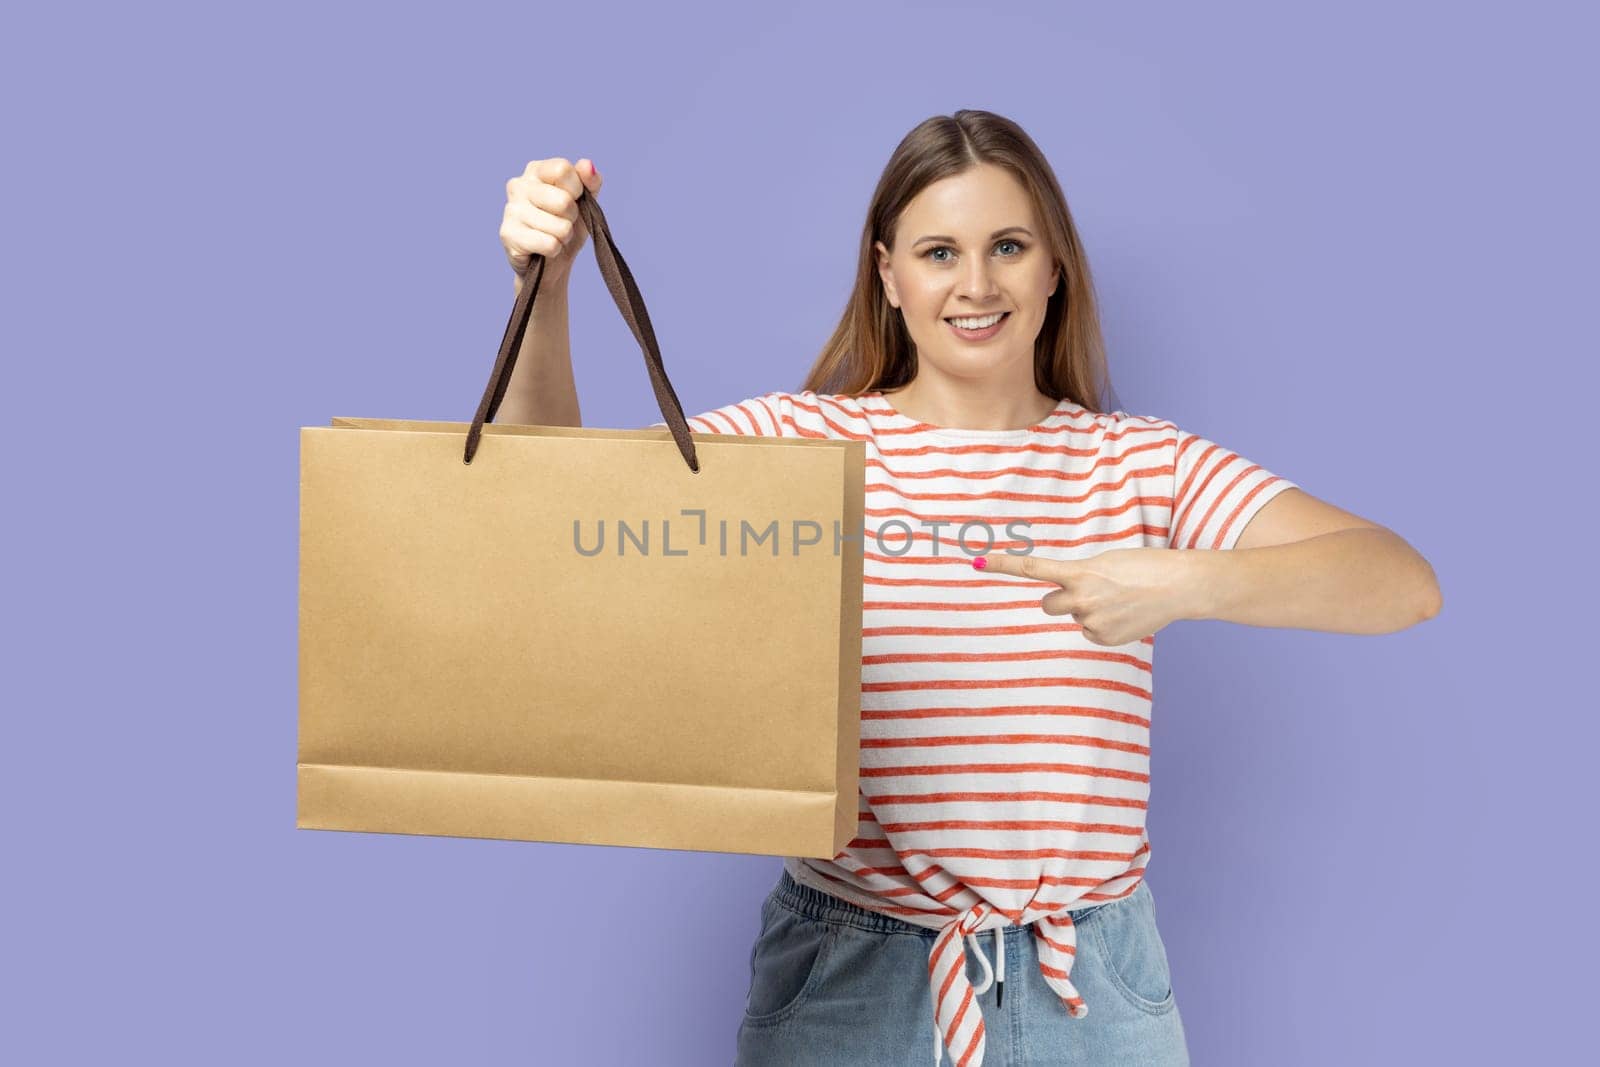 Portrait of attractive positive young blond woman wearing striped T-shirt standing pointing at shopping bag, looking at camera with toothy smile. Indoor studio shot isolated on purple background.